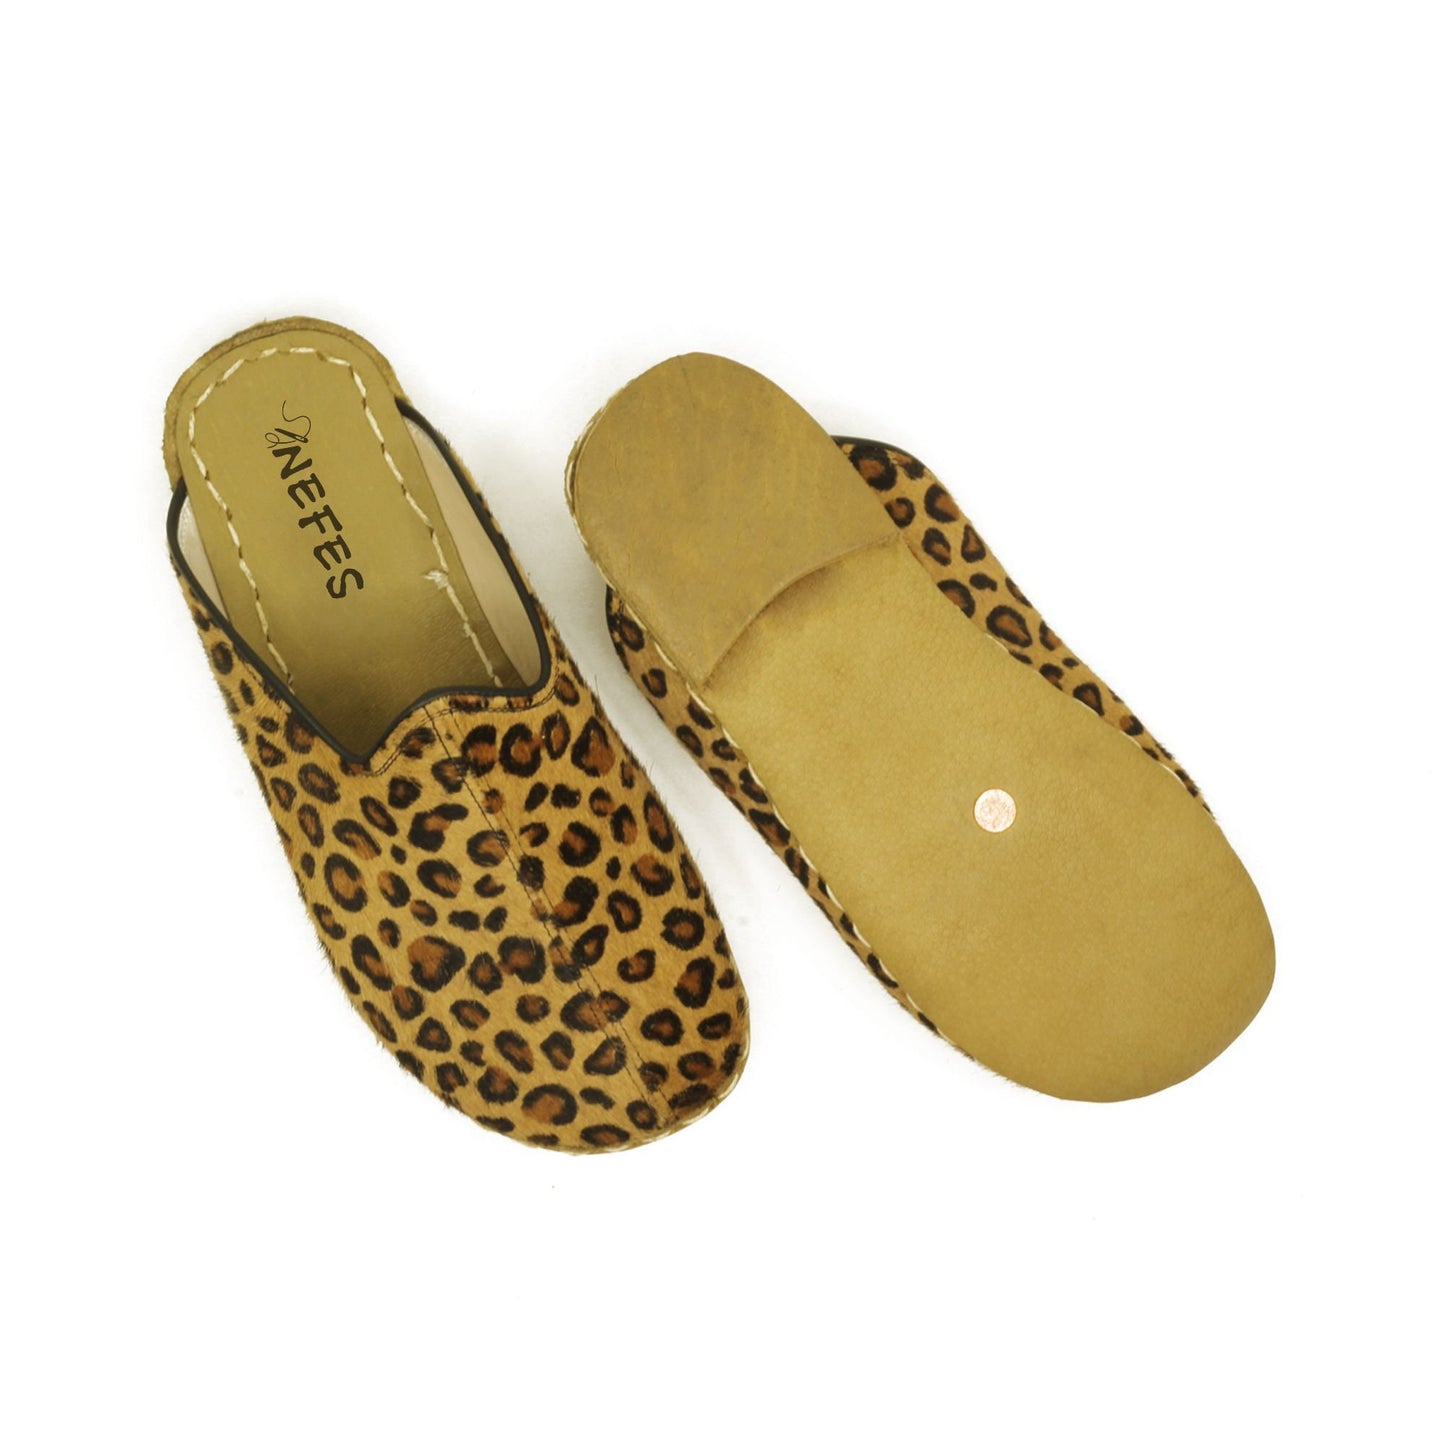 Barefoot - close toed slippers - Leopard Hairy  Leather - Winter Slippers - Copper Rivet - For Women